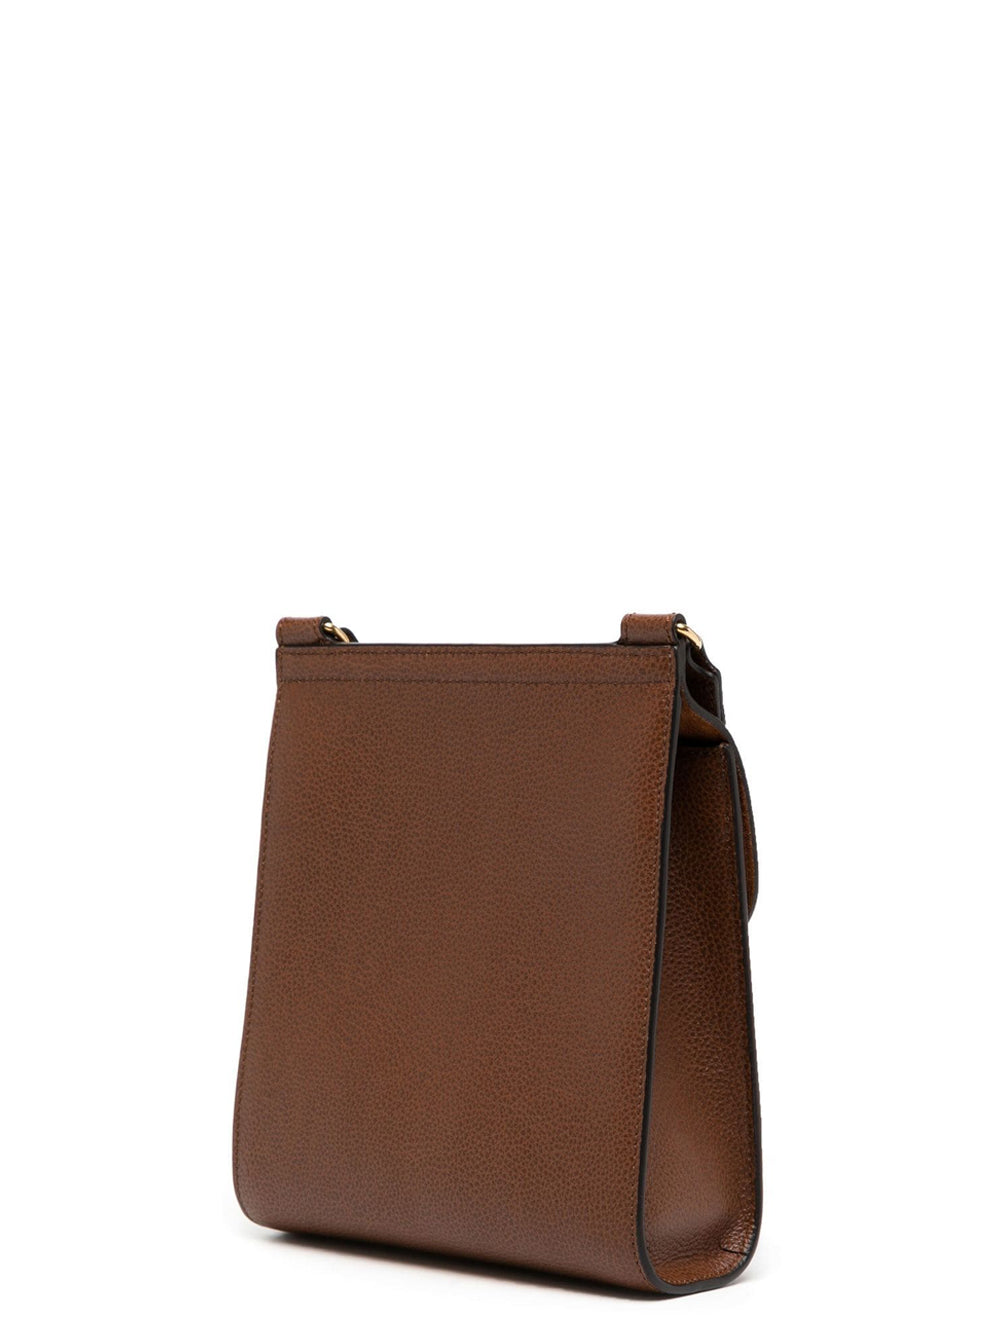 Mulberry-Small-Antony-N-Two-Tone-Crossbody-Brown-2